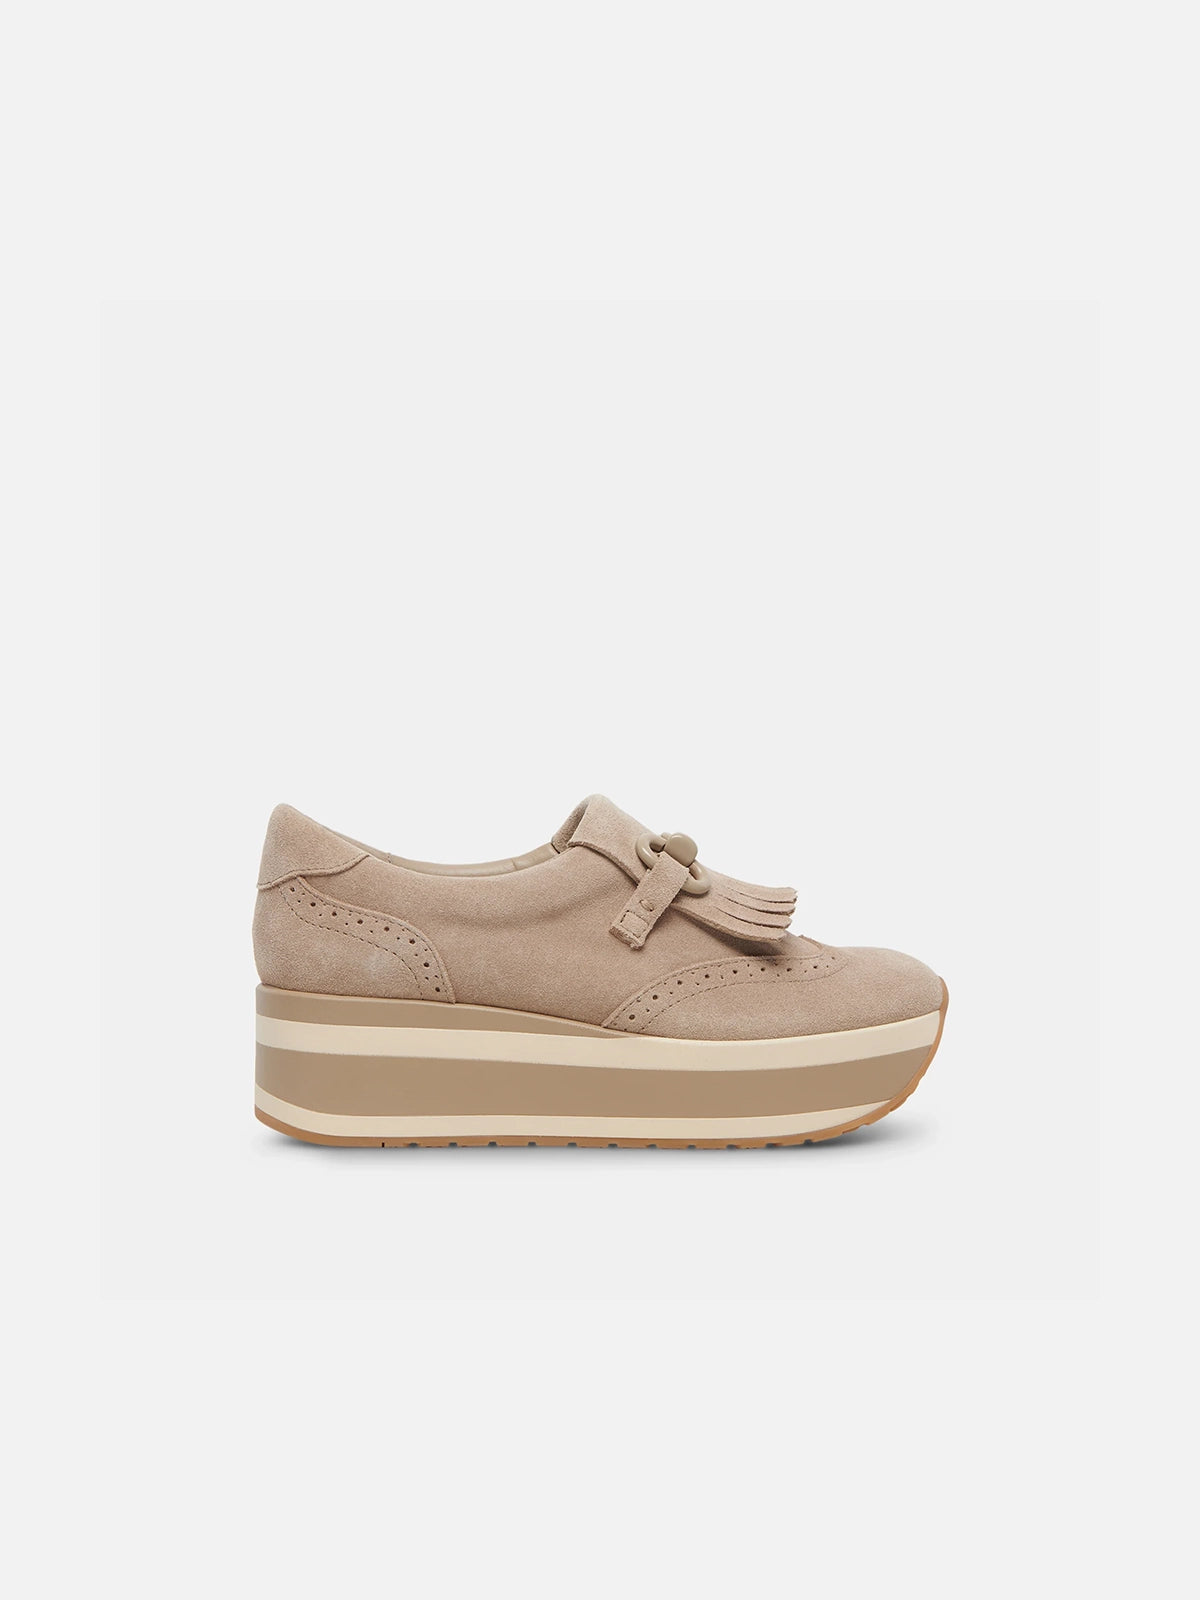 dolce vita jhax platform sneakers in almond suede